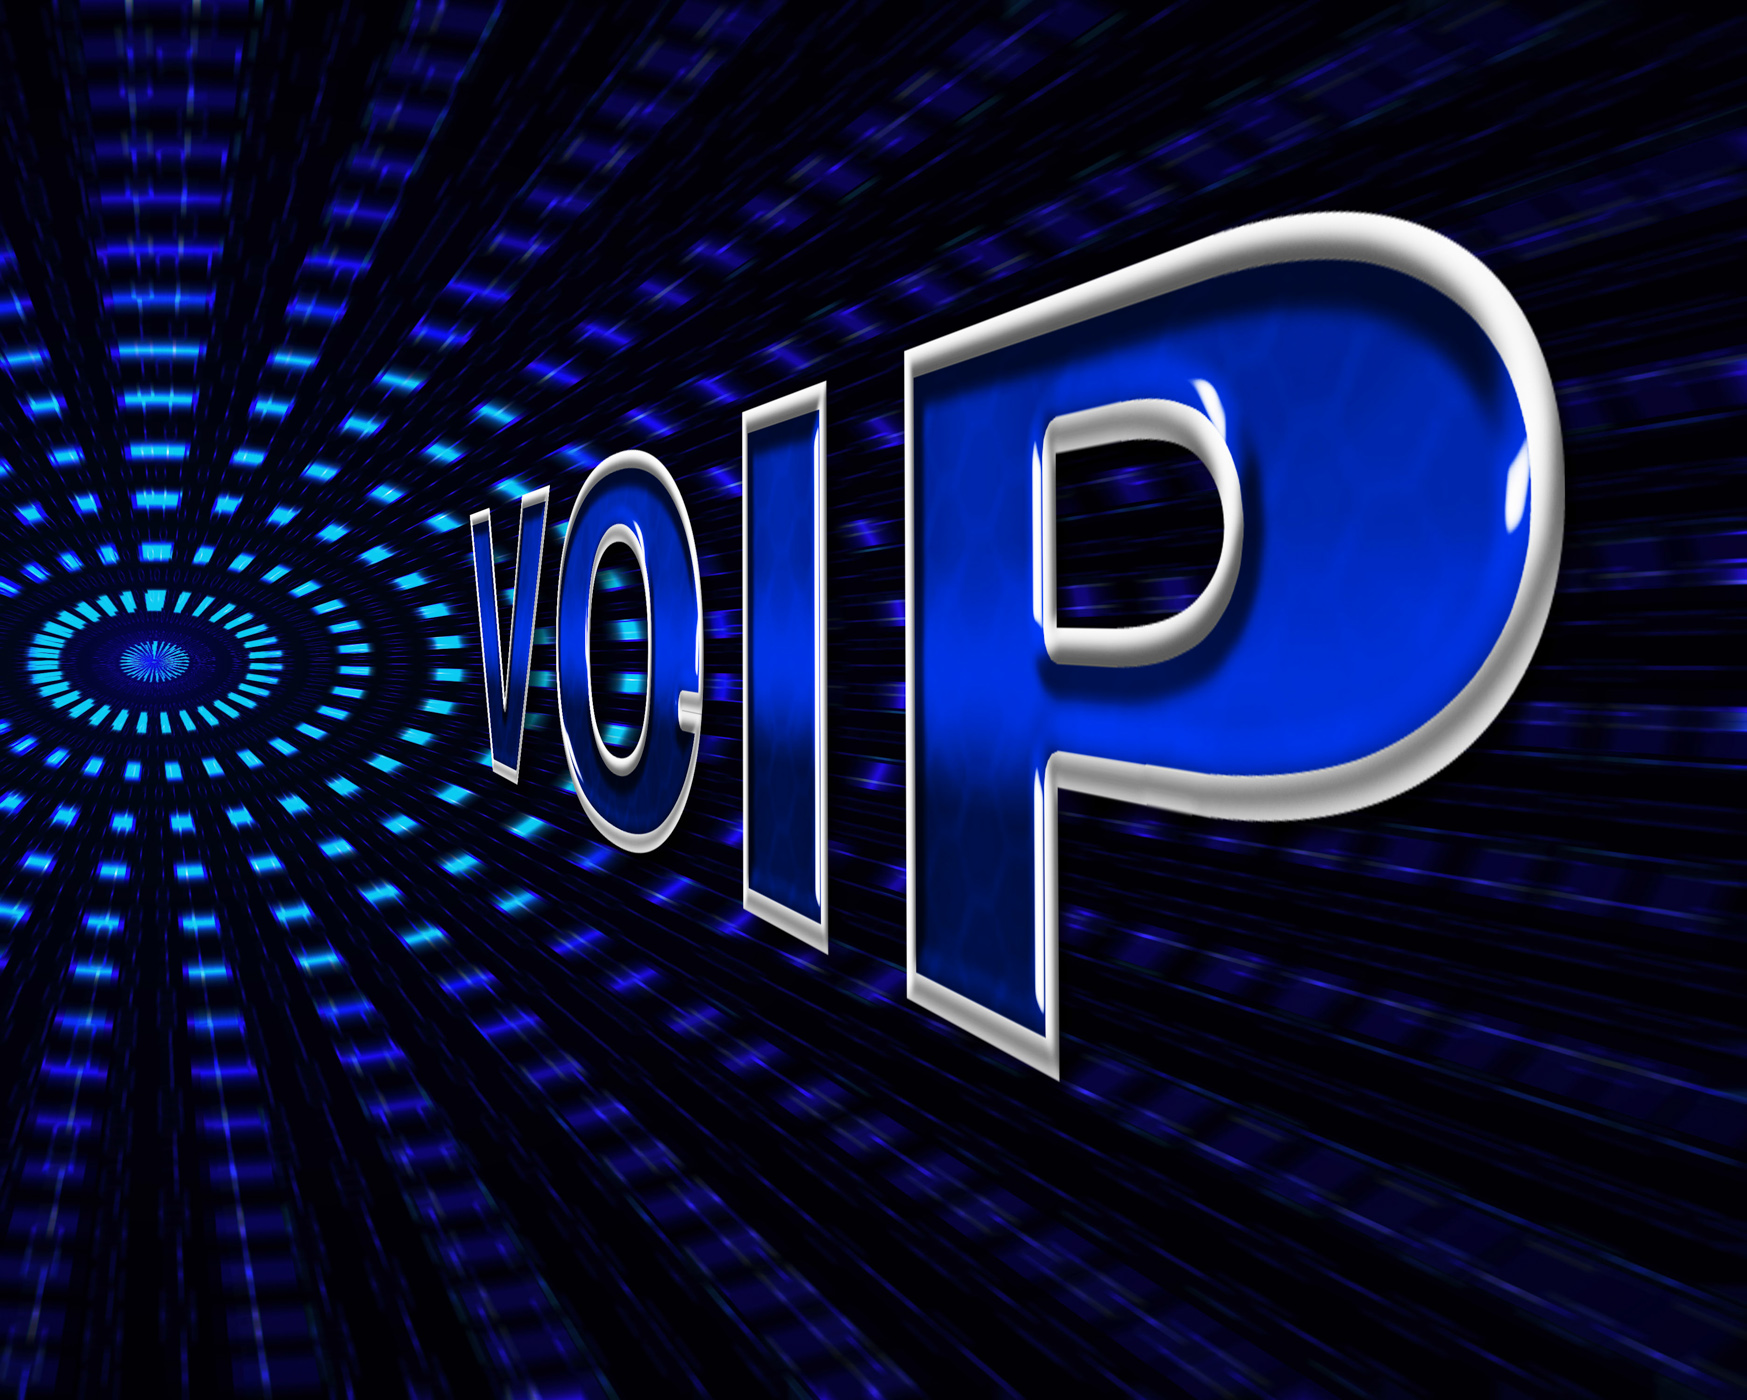 Voip telephony means voice over broadband and protocol photo